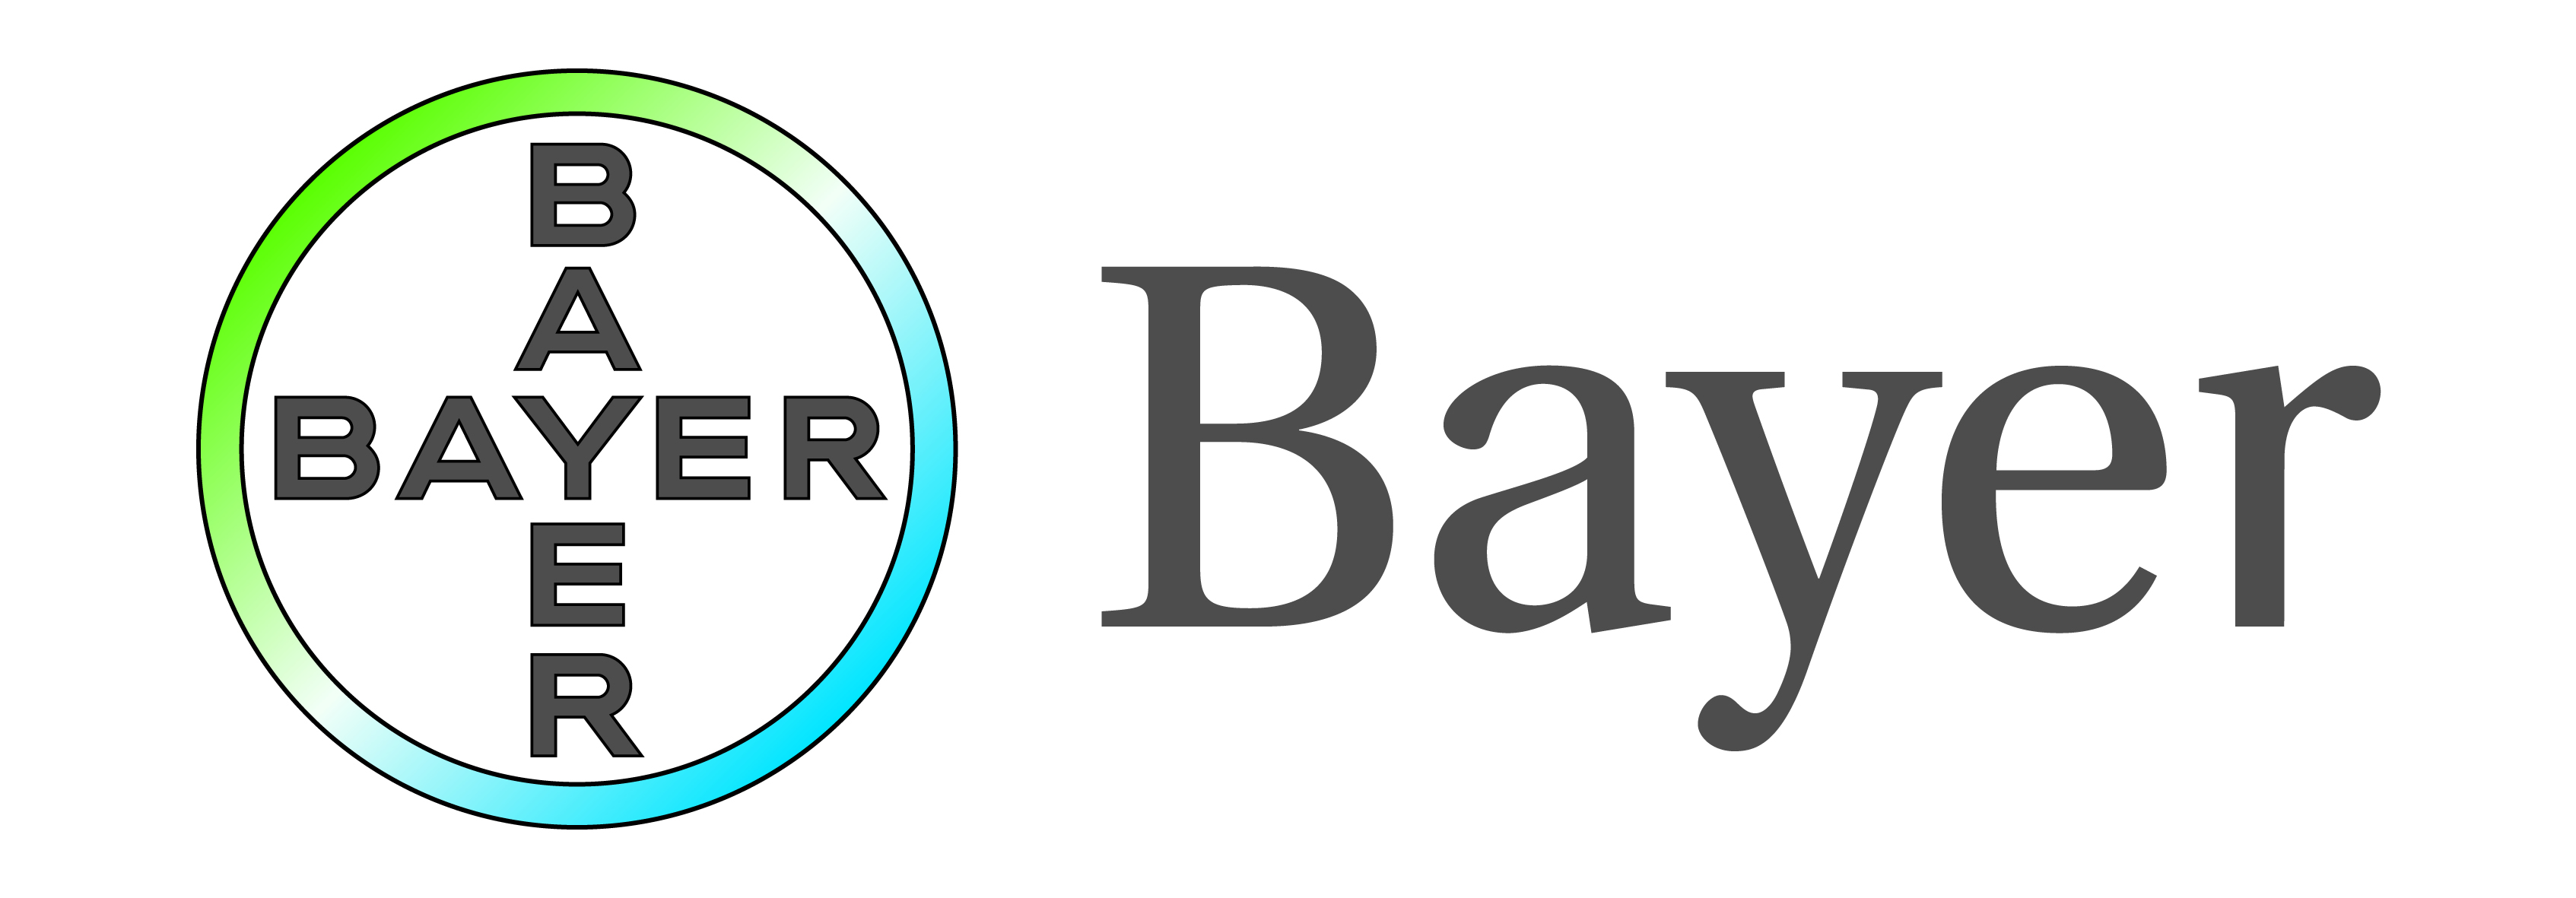 Bayer Pledges Emphasis on Helping Farmers Produce More with Fewer Resources